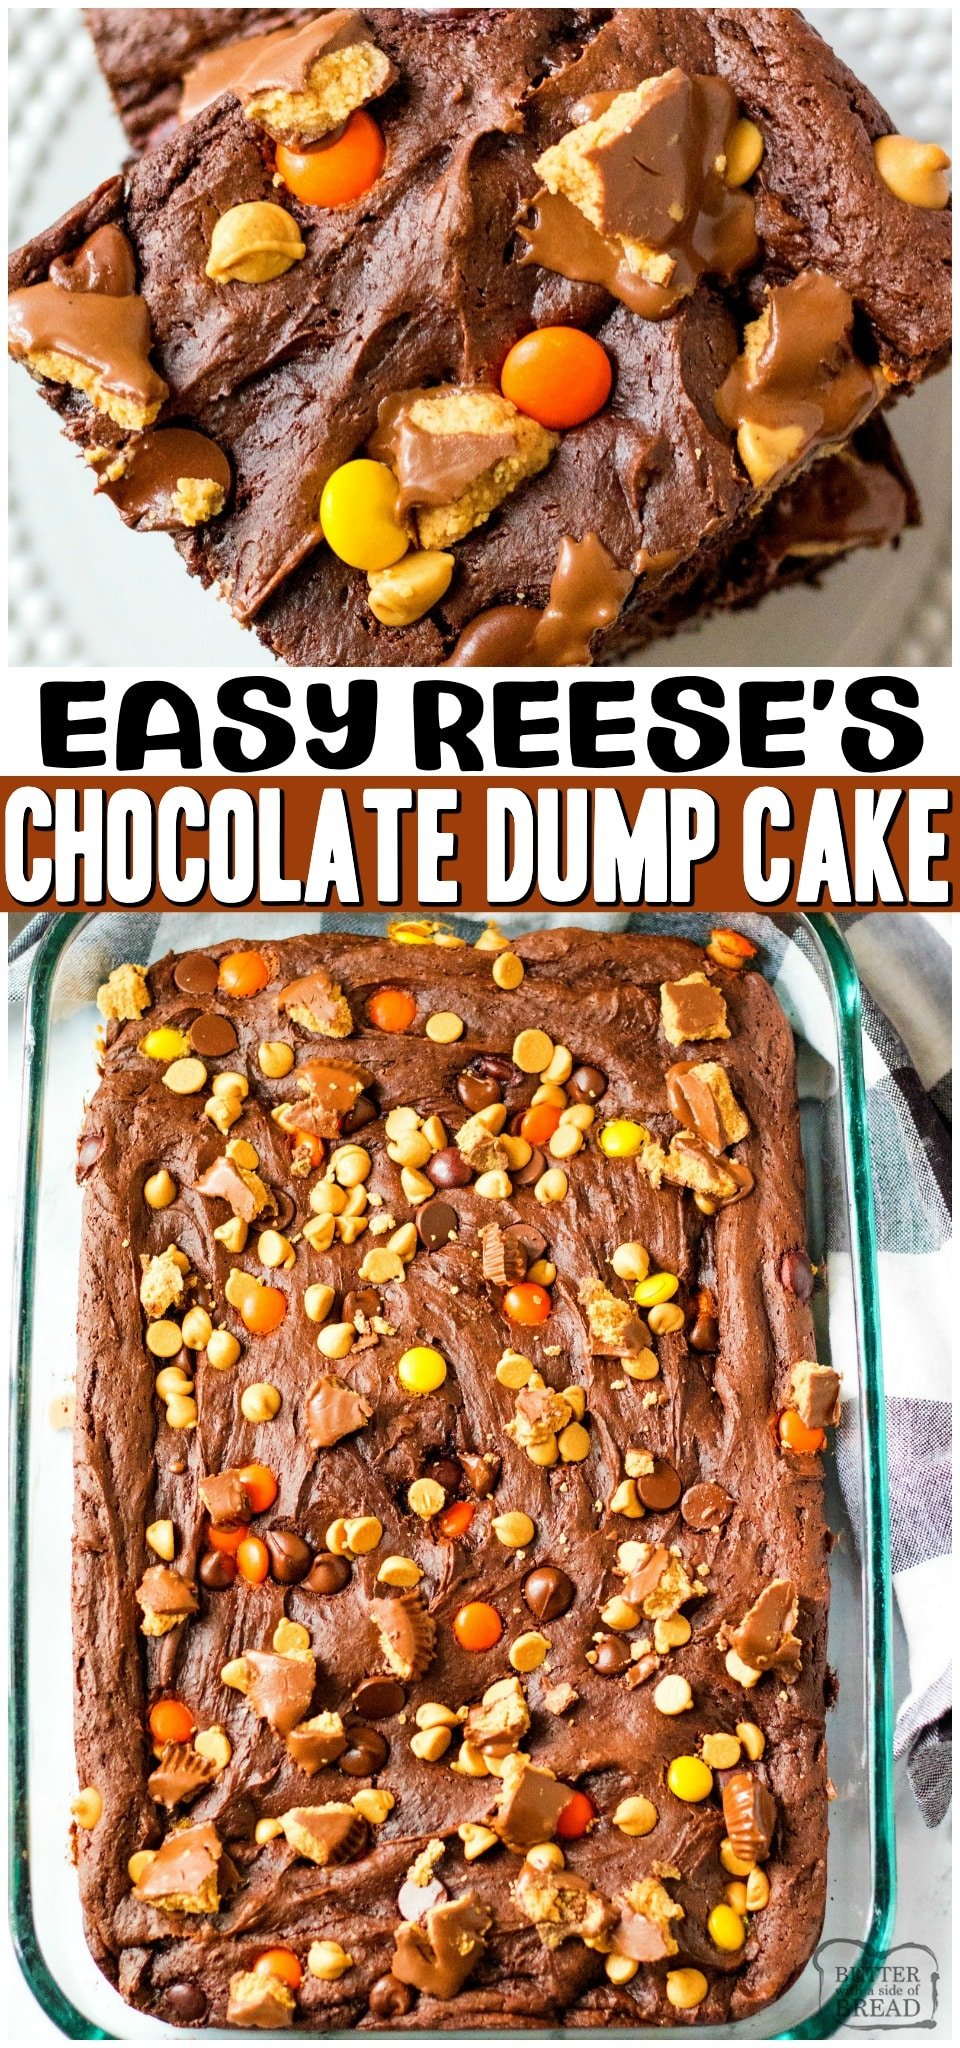 Easy Reese’s Chocolate Dump cake recipe is so simple to make! Dump Cake= Cake mix + pudding! Rich, fudgy chocolate cake topped with chocolate chips, peanut butter chips and Reese’s pieces.